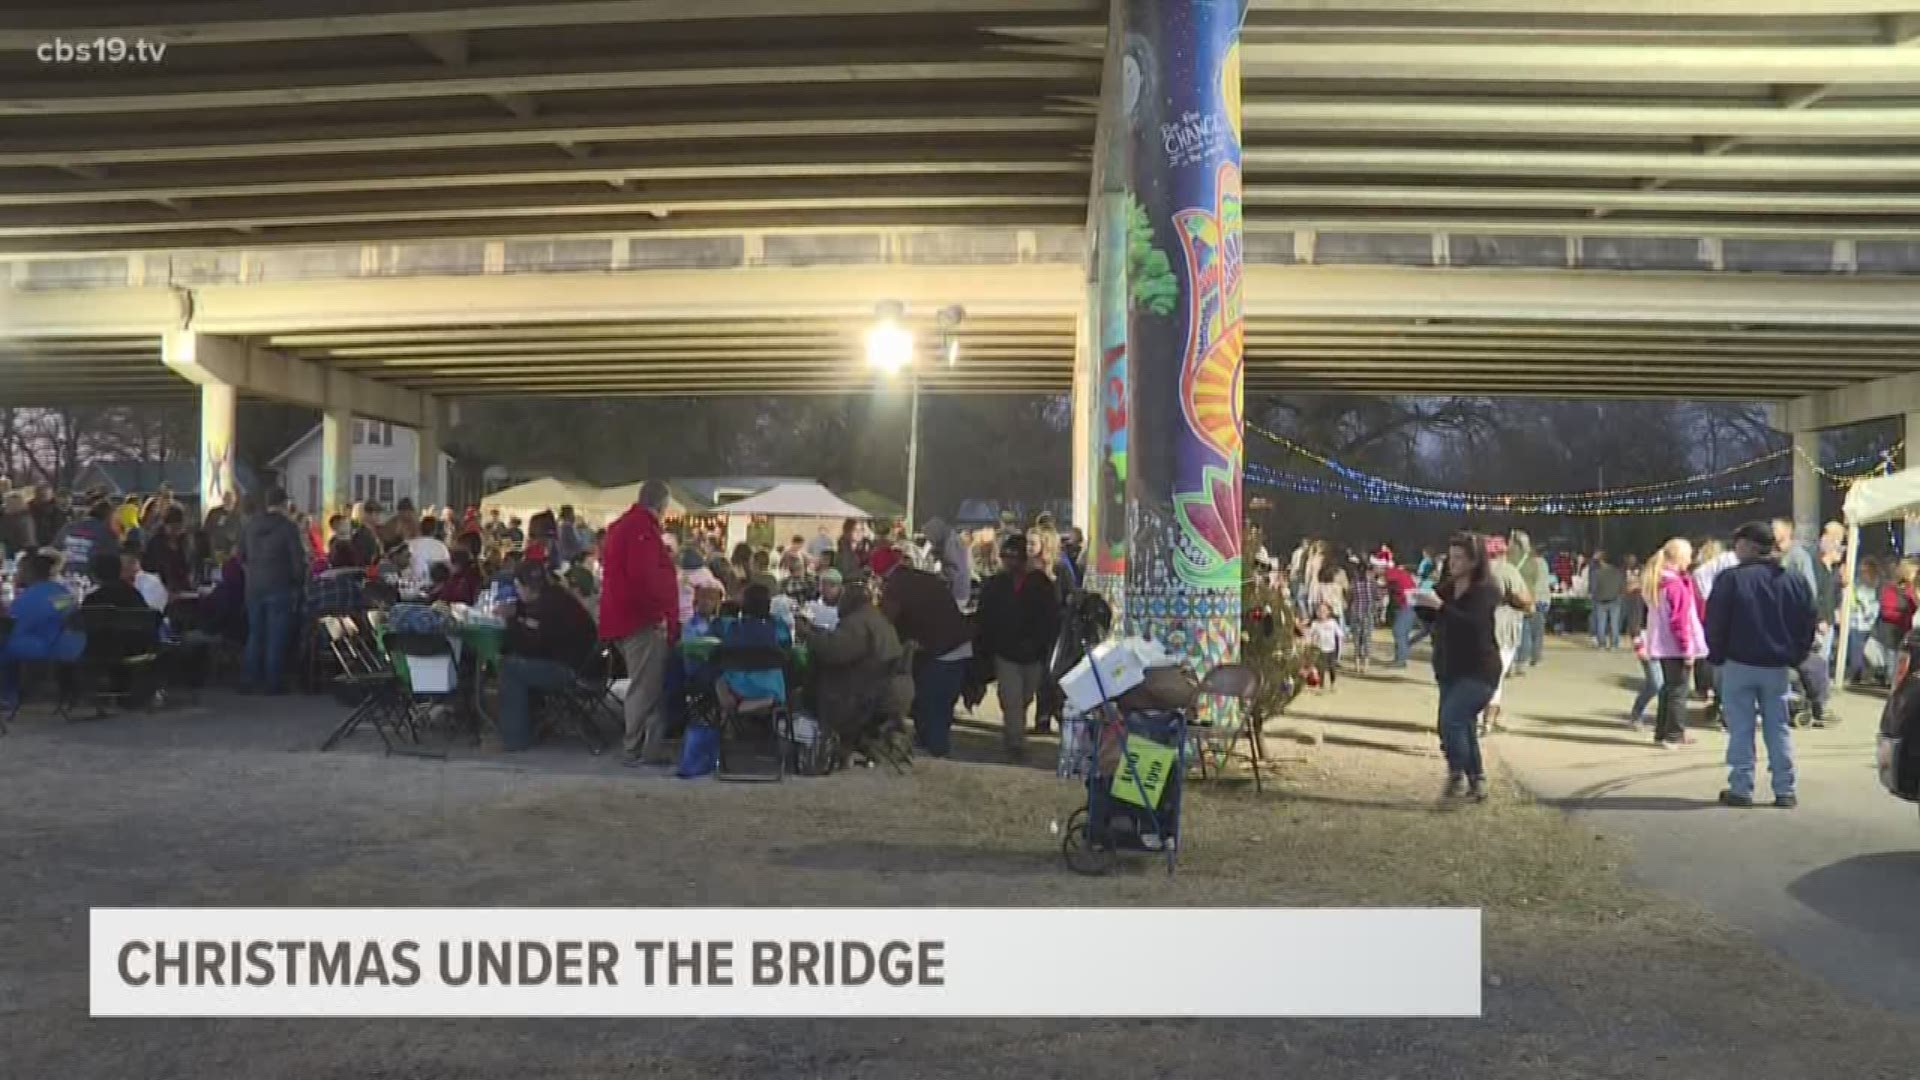 Christmas Under the Bridge is unique in Tyler as scores of people gathered 'under the bridge' to celebrate charity and fellowship.